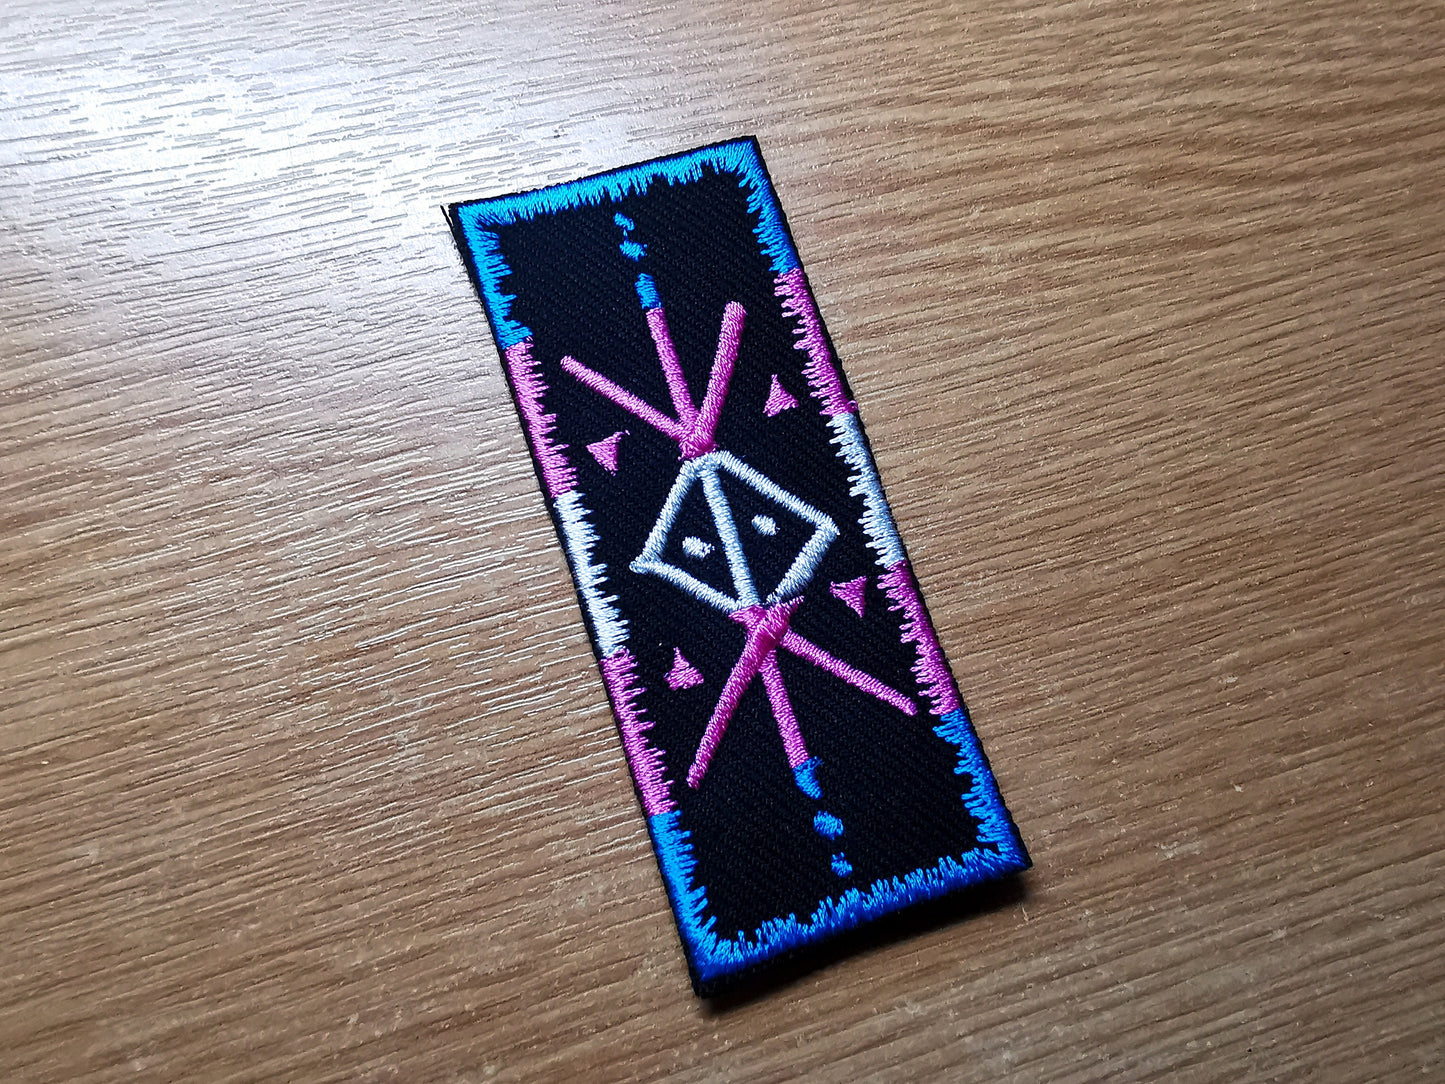 Protection Trans Flag Bindrune Viking Patch Iron On Embroidered Norse Heathenry Bind Runes